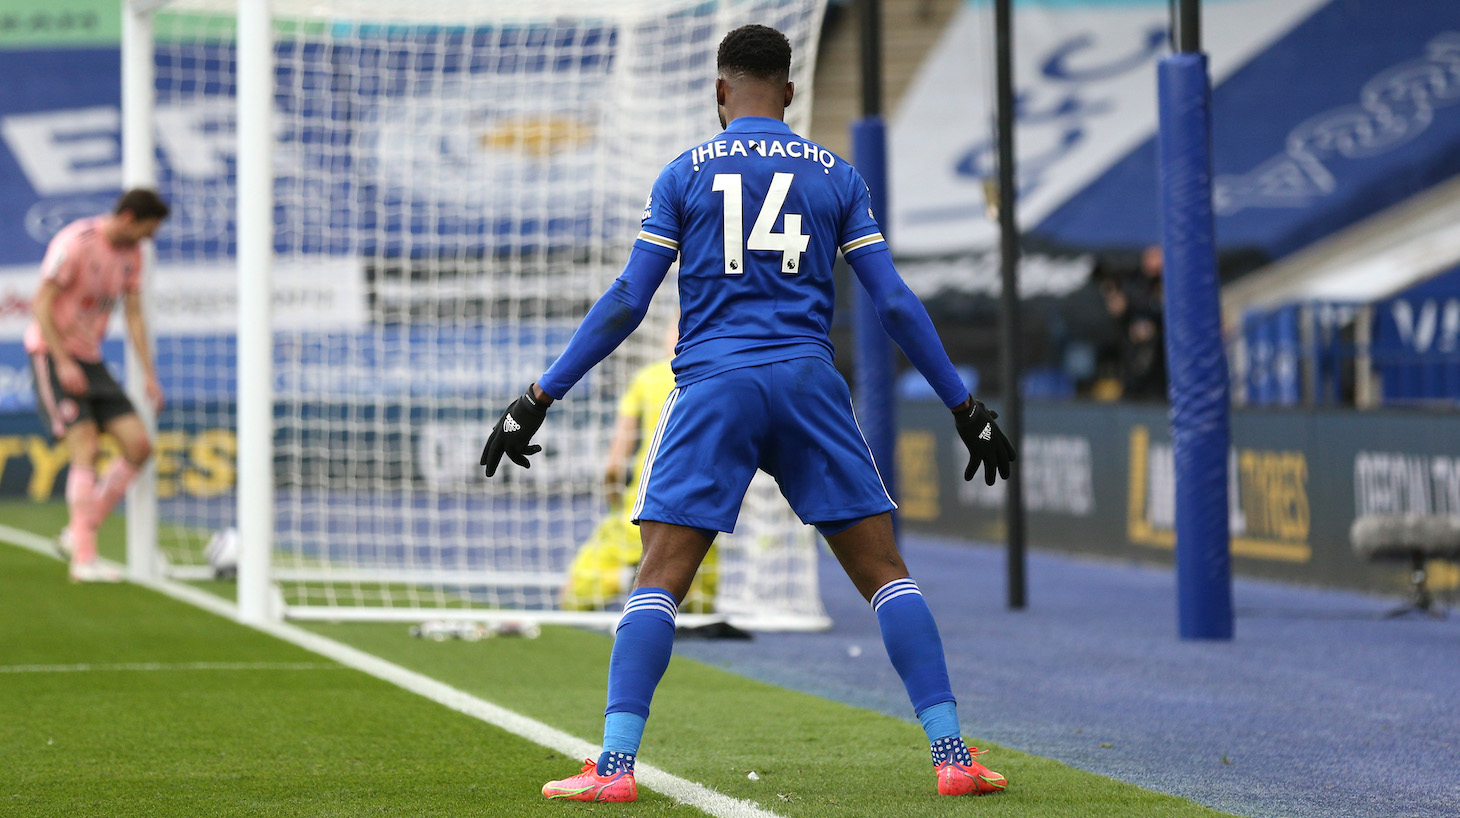 Kelechi Iheanacho of Leicester City celebrates after scoring their side's first goal during the Premier League match between Leicester City and Sheffield United at The King Power Stadium on March 14, 2021 in Leicester, England.